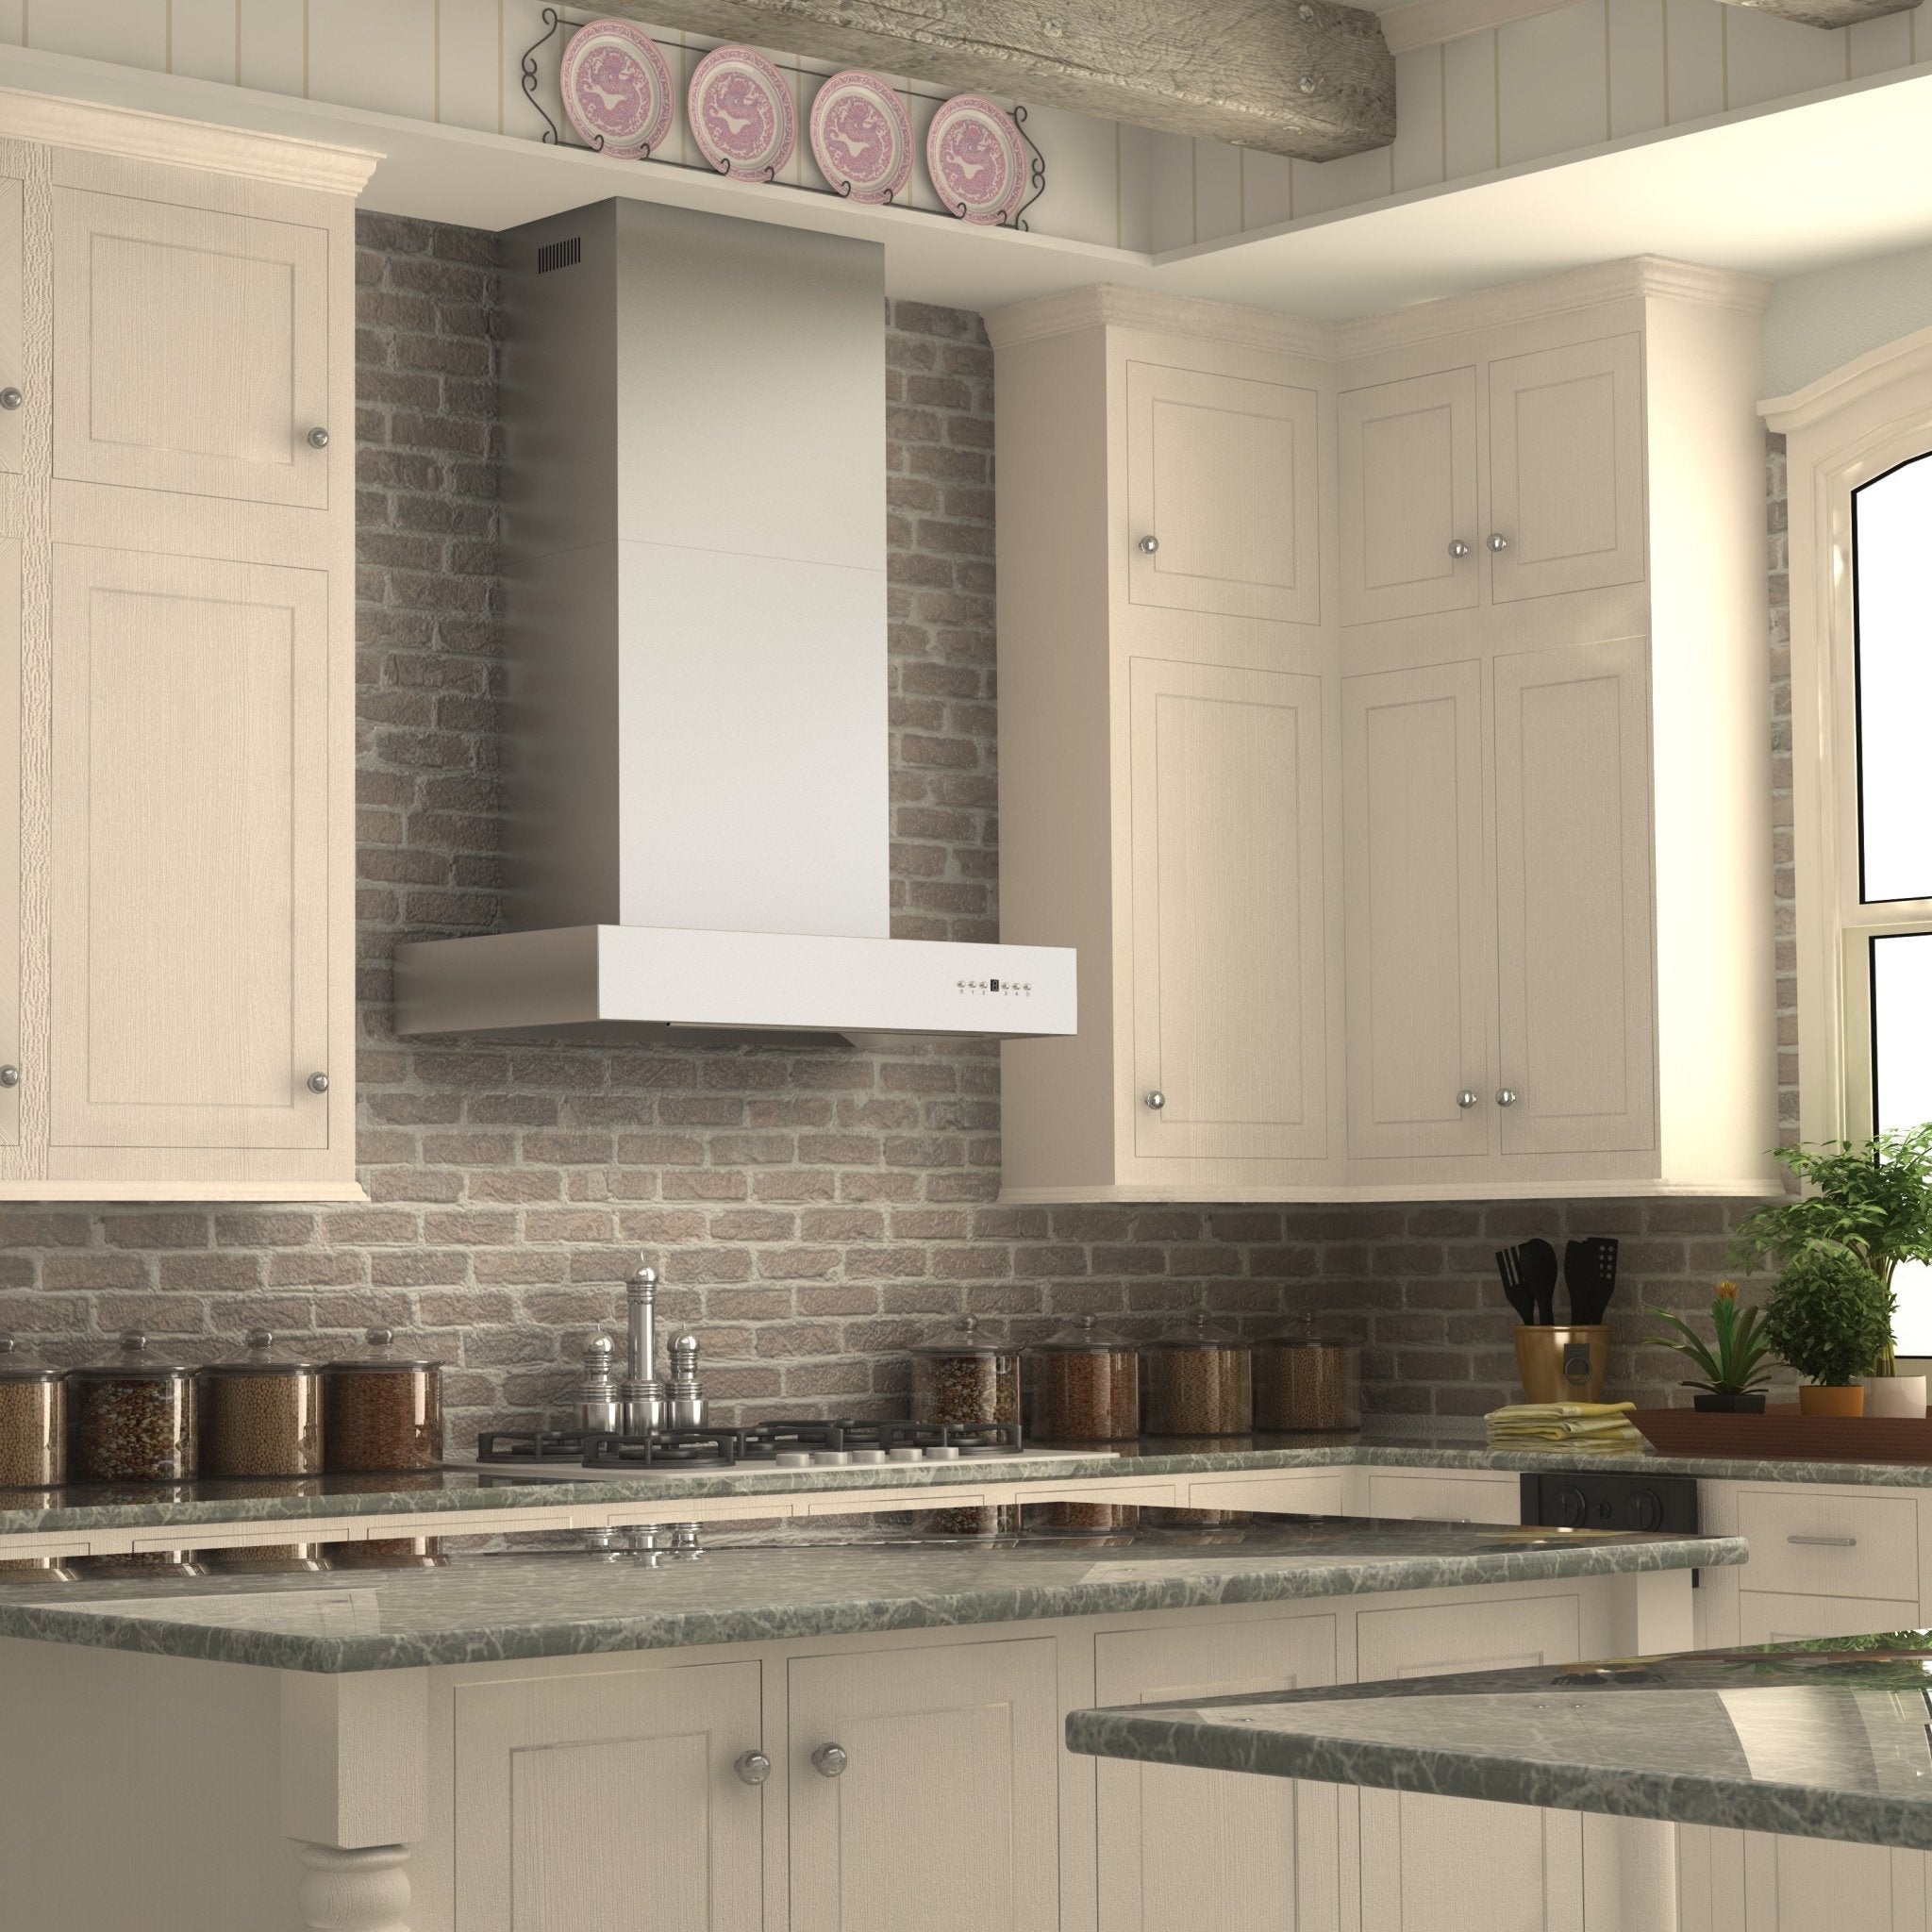 ZLINE Convertible Professional Wall Mount Range Hood in Stainless Steel (KECOM) in a farmhouse-style kitchen.